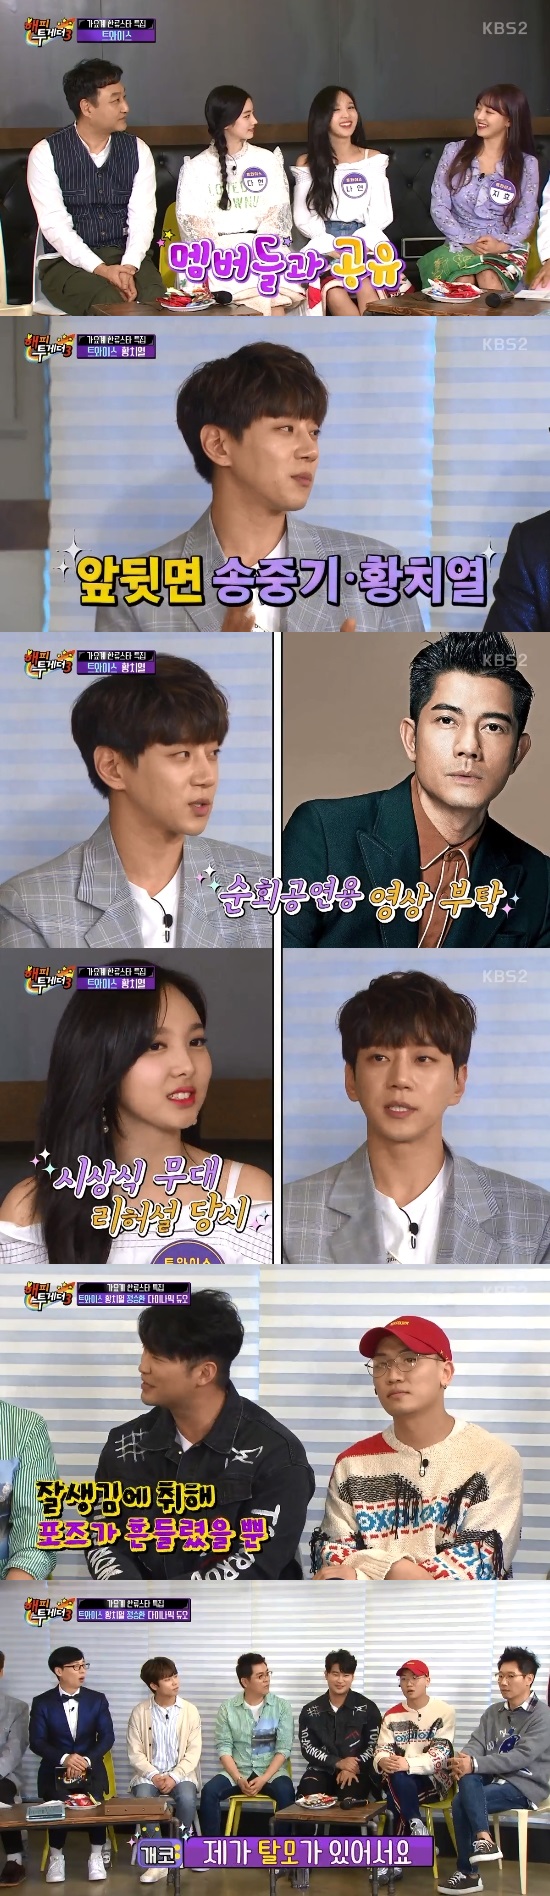 Dynamic duo, Hwang Chi-yeul, Johnson fans, TWICE appeared in the special feature legendary Jodon Ali of KBS 2 TV Happy Together 3 broadcasted on the 27th.TWICE that he likes karaoke usually expresses the wind wanting to break the record of Hez 3.Hwang Chi-yeul ranked self-praised.Hwang Chi-yeul boasting of tremendous popularity in China said that Chinese Journal of Artists Magazines is Song Joong-ki and Nada and attracted a lot of attention.Followed by Aaron Kwok, also showed off friendship with the King continent.He said The ministry has my brother take a tour and have me take pictures.The continents shared the program in China.It was a program like infinite challenge in China.I will invite surprise by explaining that the king continues to come to my room and take a picture.Not only that, even at a duty free shop at the airport, he added that he was decorated with his own face.Hwang Chi-yeul found Popularity is a bubble.However, like the bubble bubble, it will happen again. TWICE Nayeon also spared Hwang Chi-yeuls praise.I heard Hwang Chi-yeul live while rehearsing the awards ceremony, Nayeon said.Although it was morning, I was surprised to hear that too. Dynamic duo gave a big laughter to each other s disc.Gaeko said, Cheja pulled a lot of meat since he was discharged.When I took pictures from a certain moment I was confident with confidence.It is too ugly. Then Gaeko confessed that he had experienced a panic disorder by Fukche, I planted my head with hair loss.The beauty salon head raised my head.However, I did not like it, sprinkle using Hukcha and recalled that time.Also, I did a club performance next time.If you go to the concert, ink will flow on your face for sweat though it runs a lot.That trauma occurred and I re-shaved, / Photo = KBS